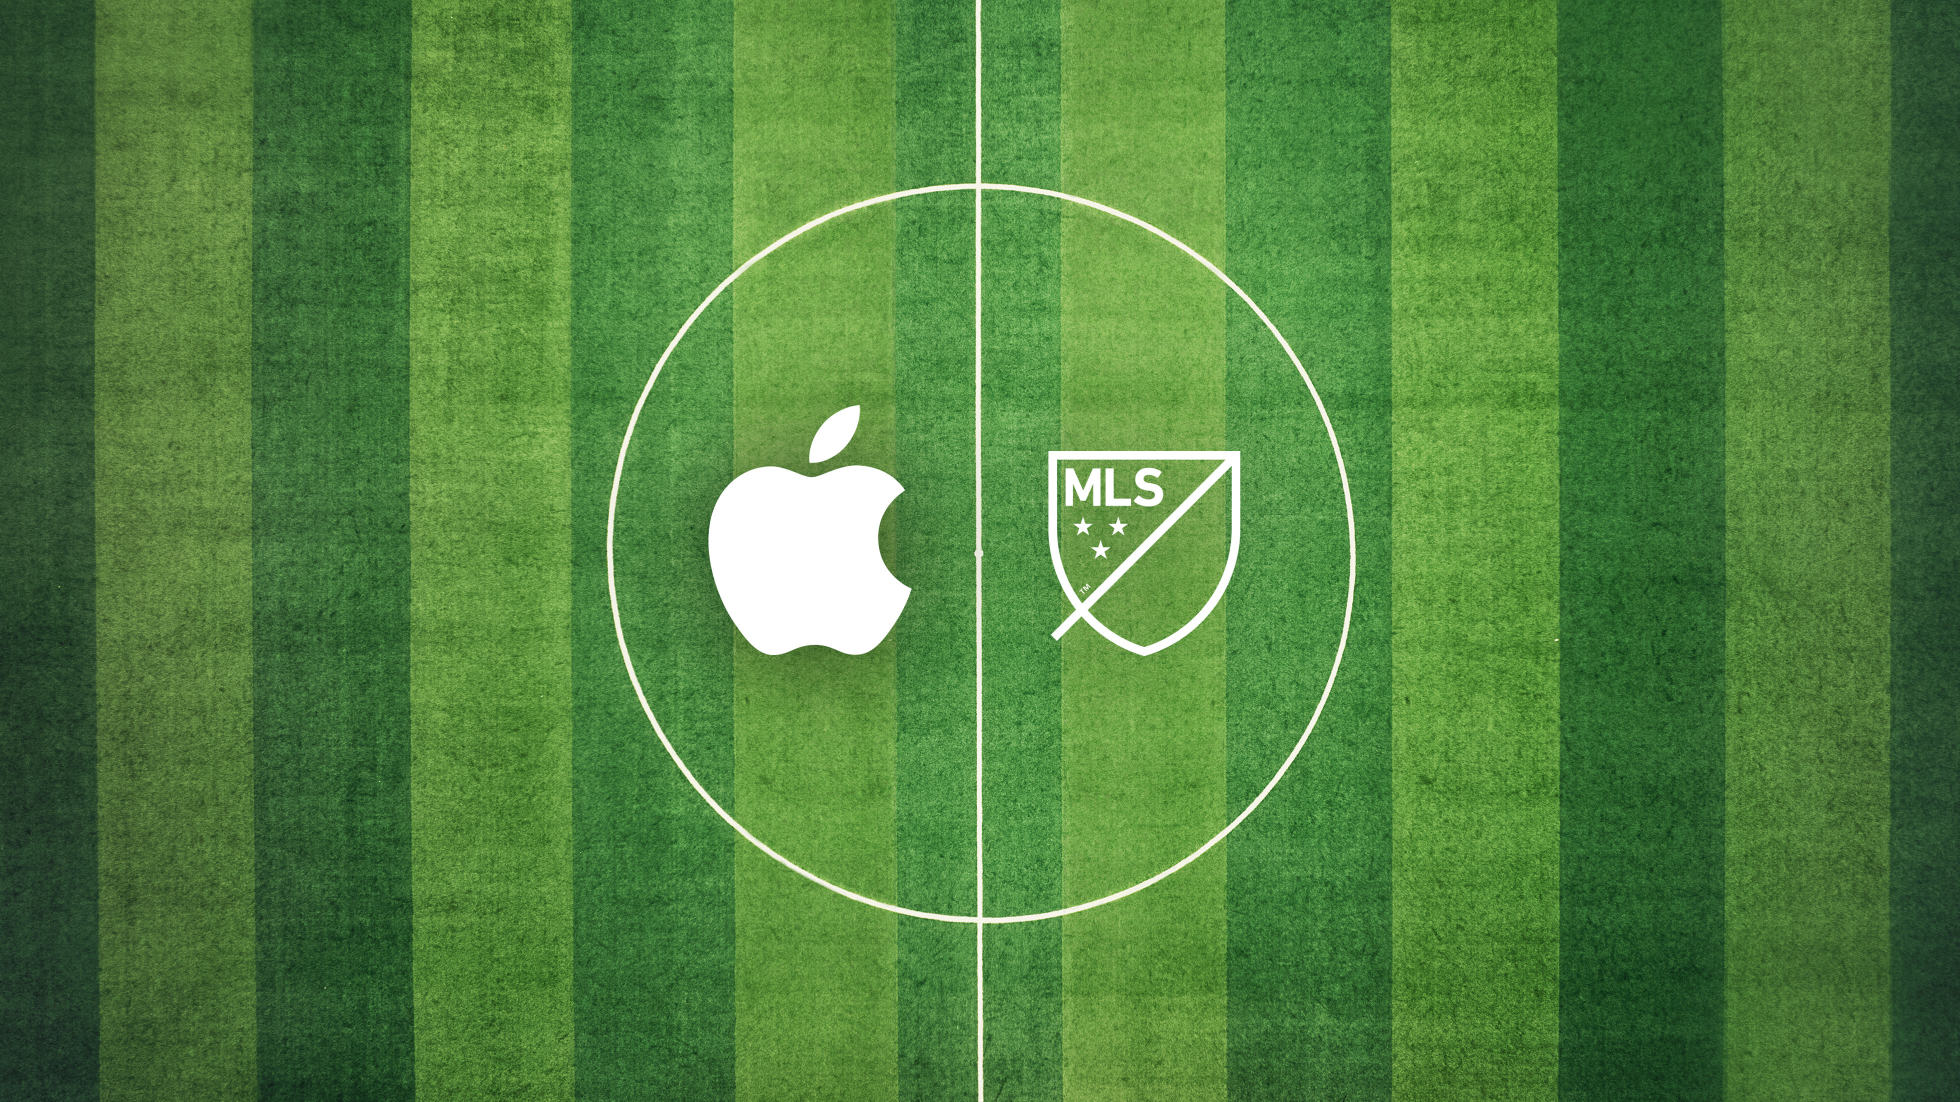 Apple & Adidas brought Lionel Messi to the MLS?